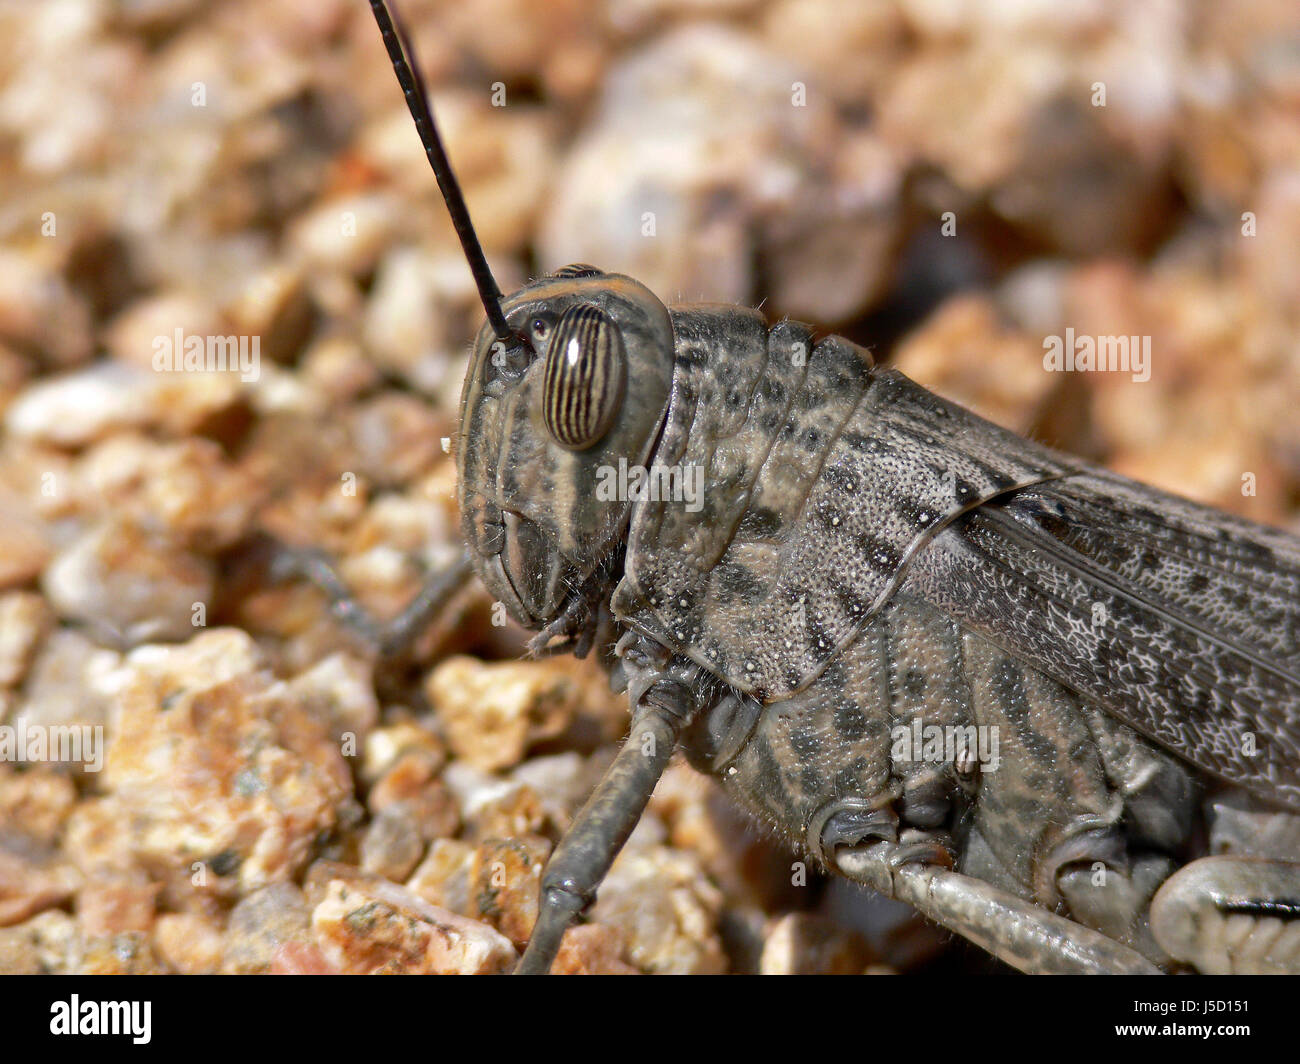 macro close-up macro admission close up view insects camouflage grasshopper Stock Photo